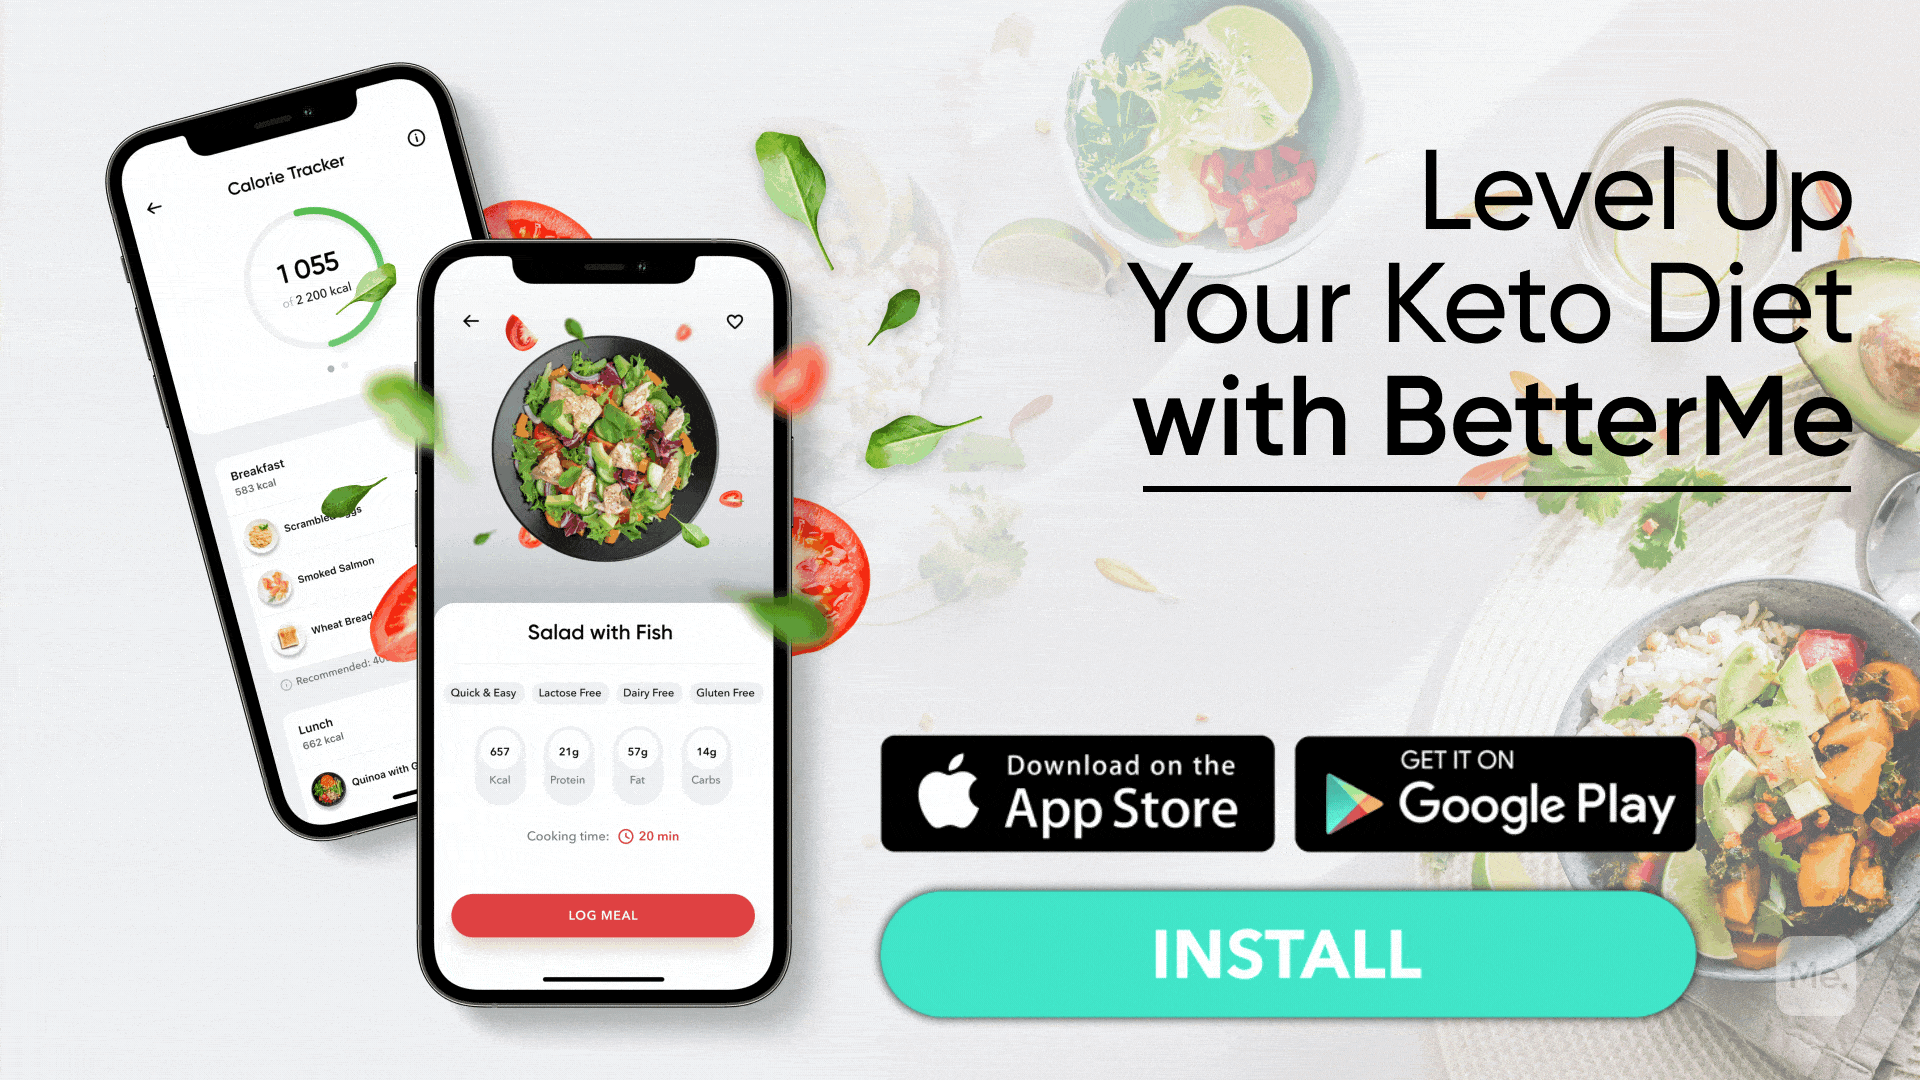 Level Up Your Keto Diet with BetterMe